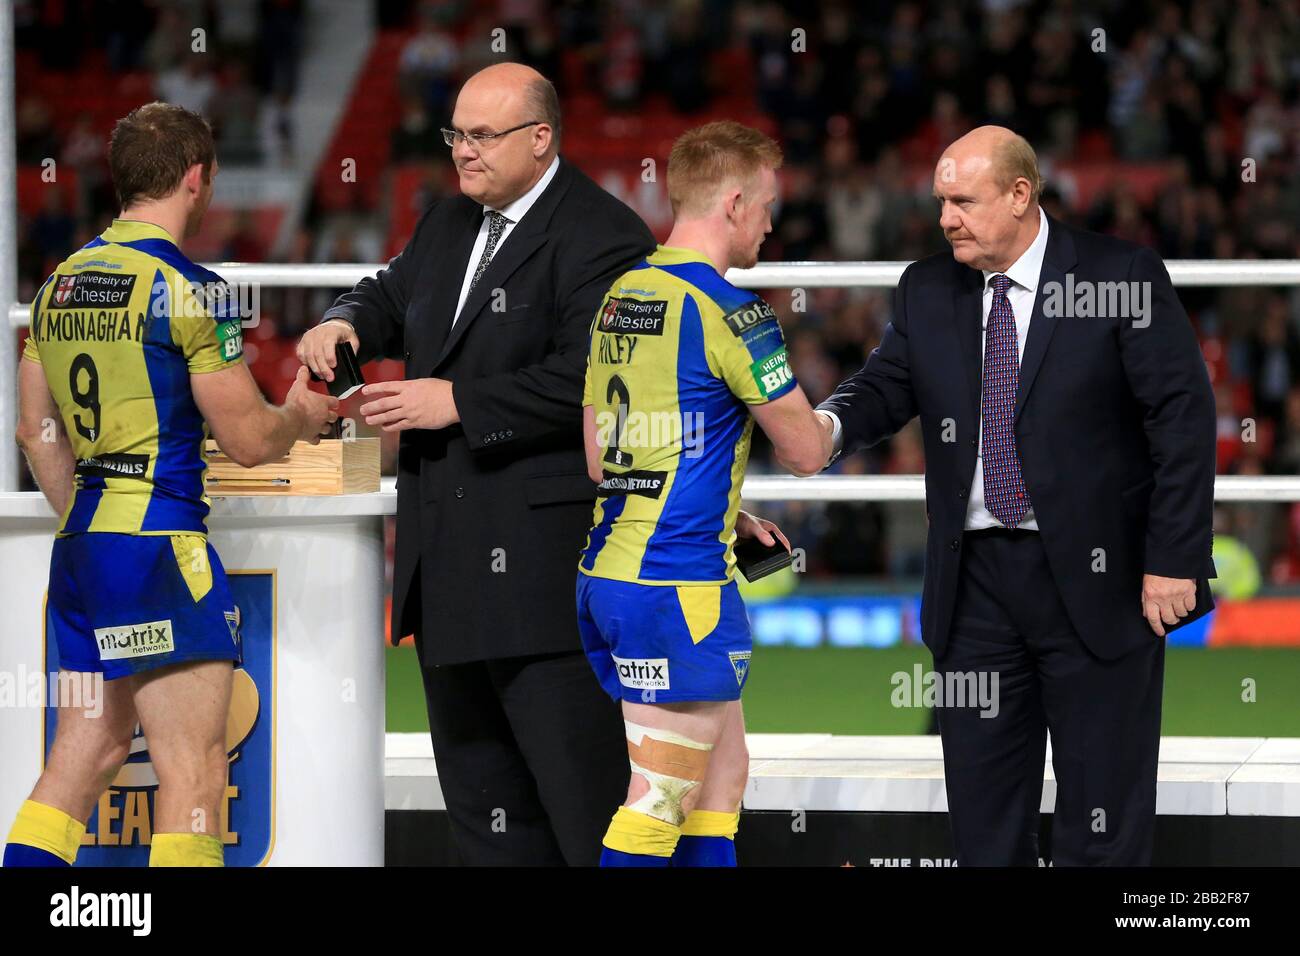 Warrington Wolves' Chris Riley (centre) shakes the hand of Brian Barwick (right) as the players collect their losers medals Stock Photo